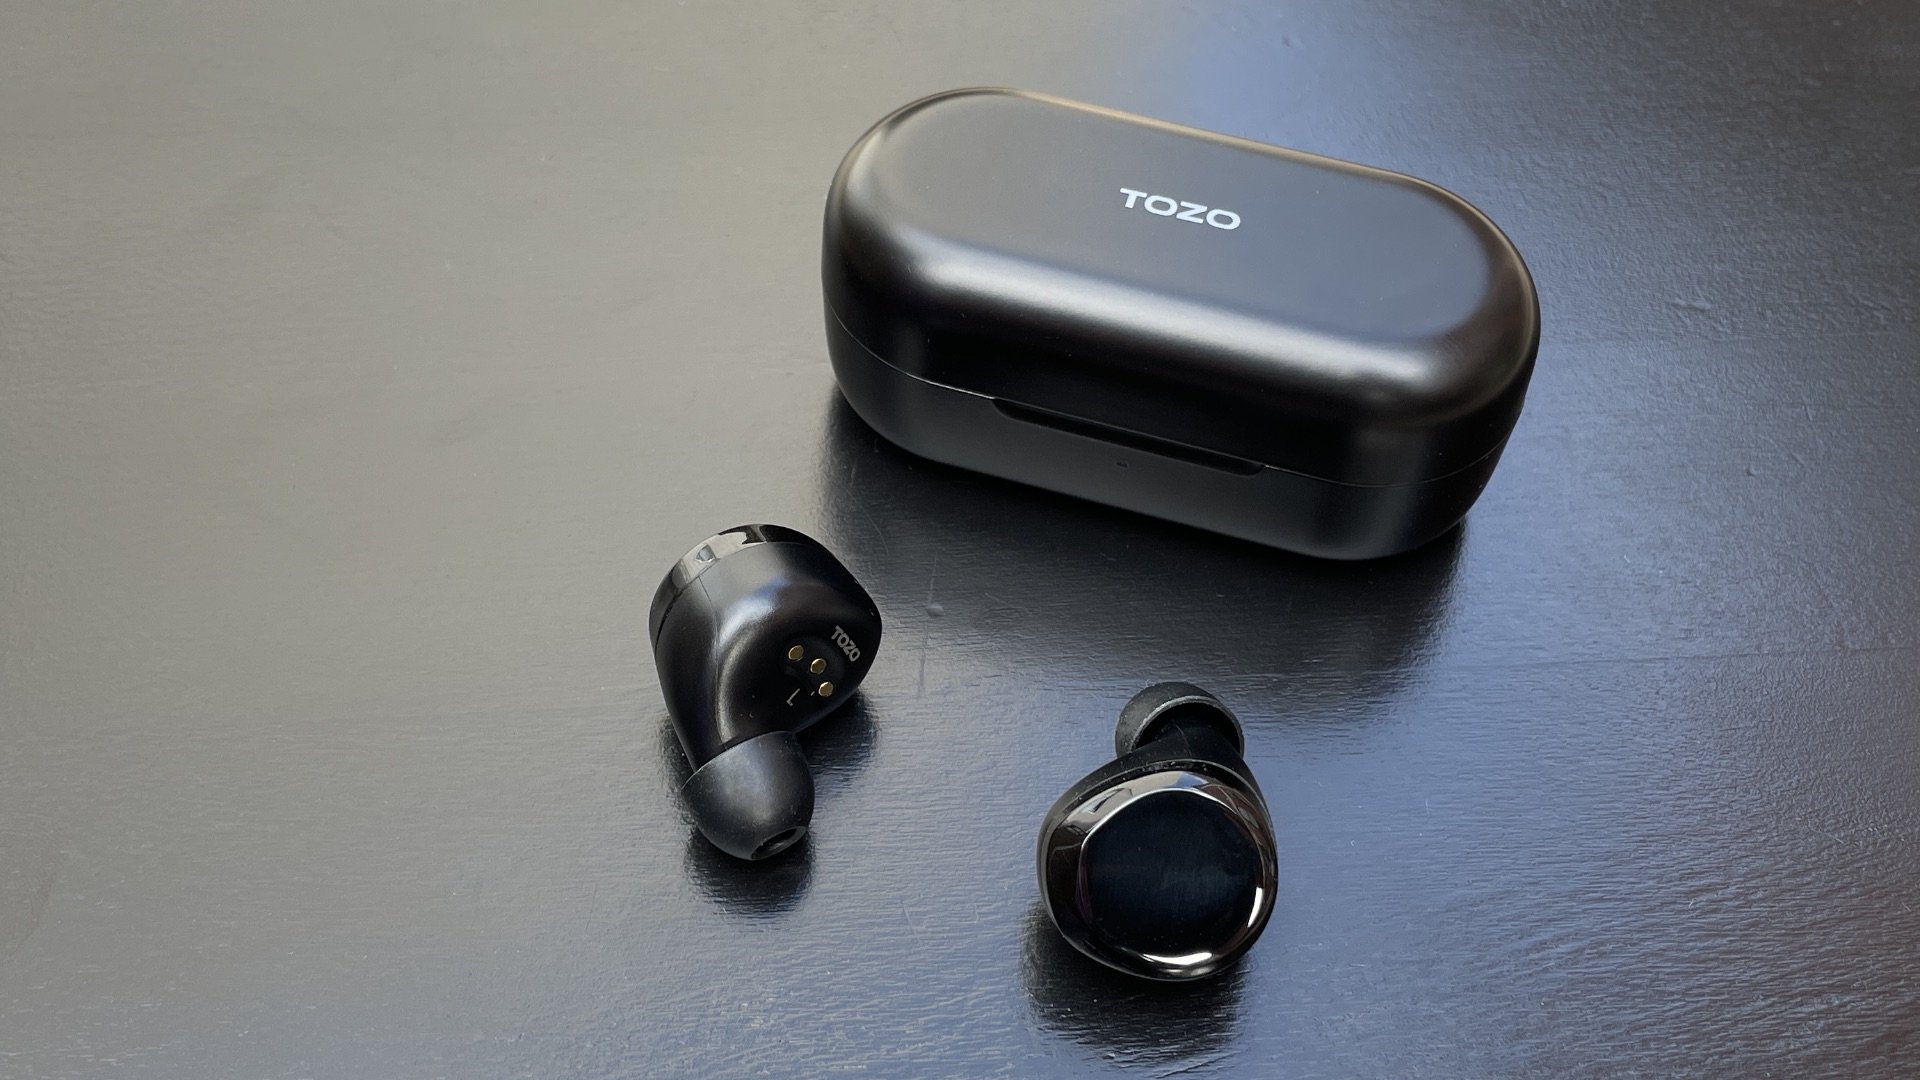 How To Reset Tozo Earbuds